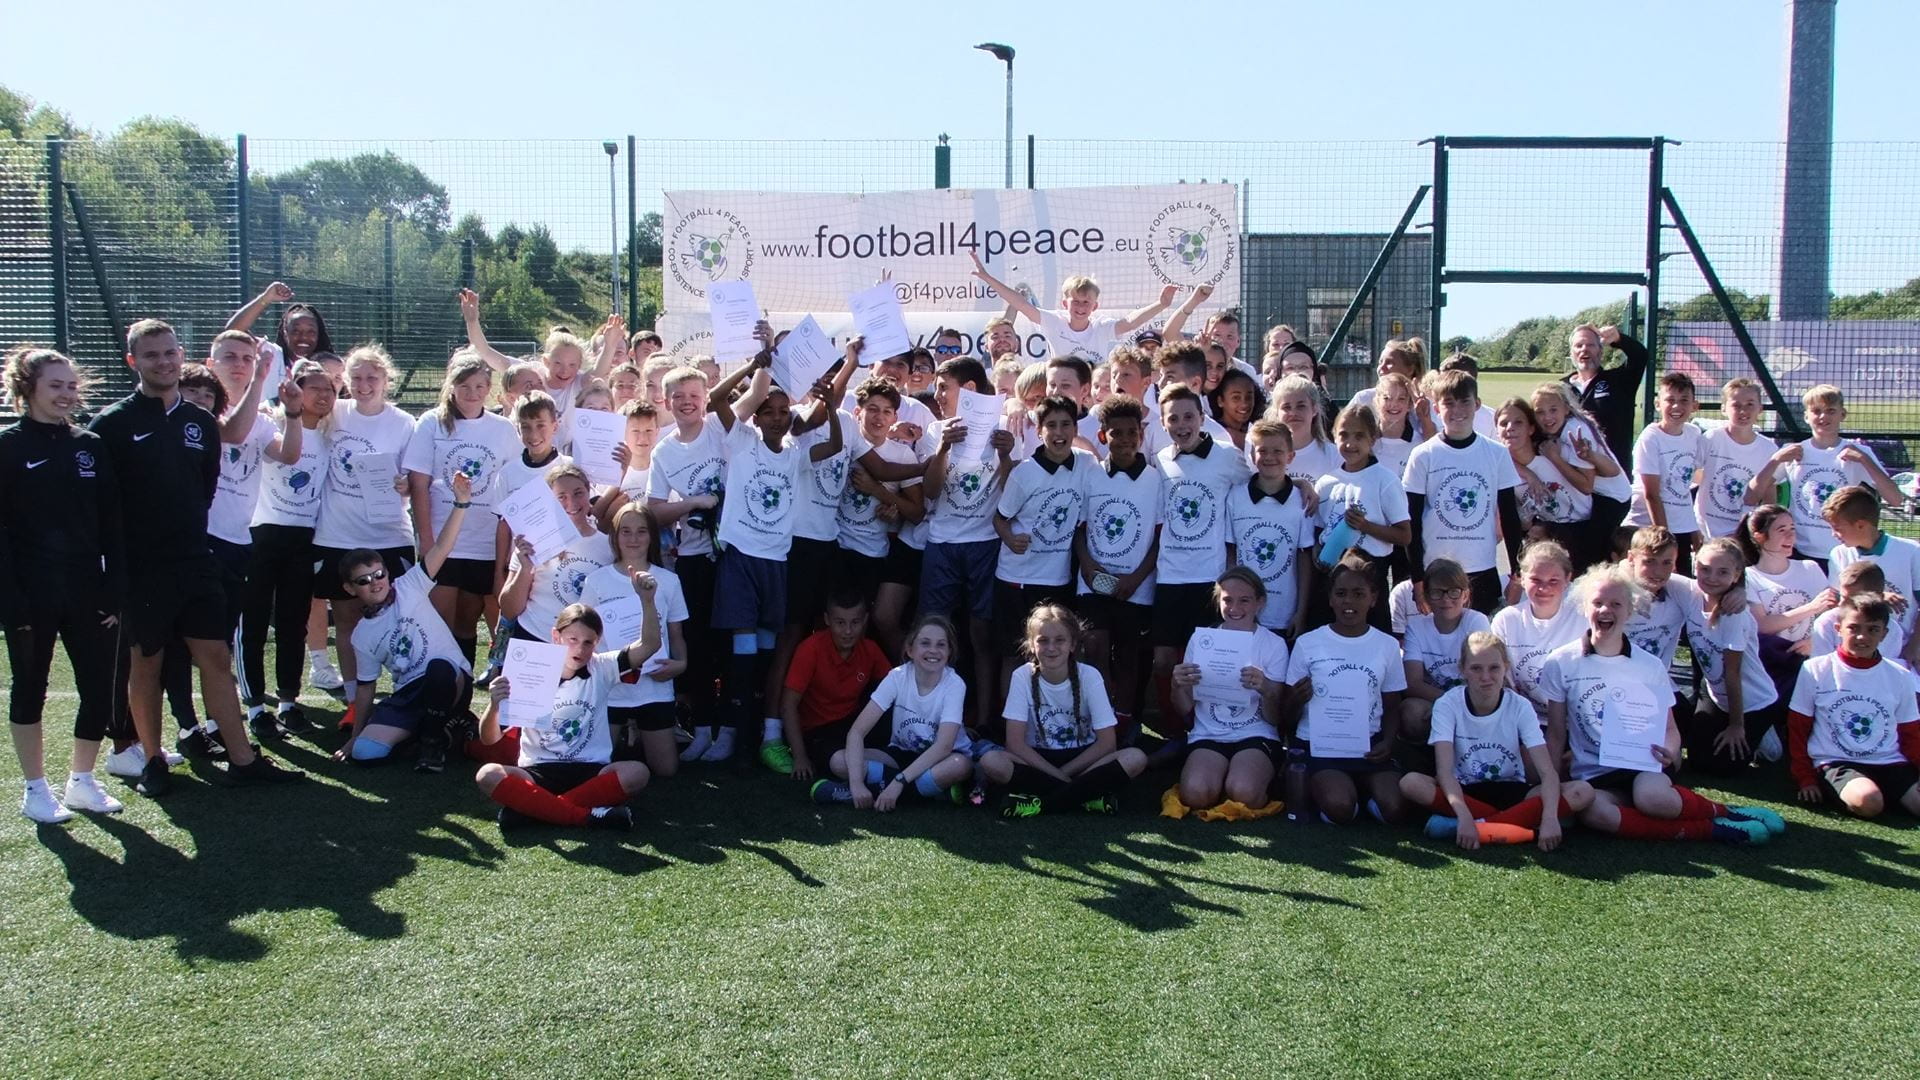 Group shot of the children on the football peace.